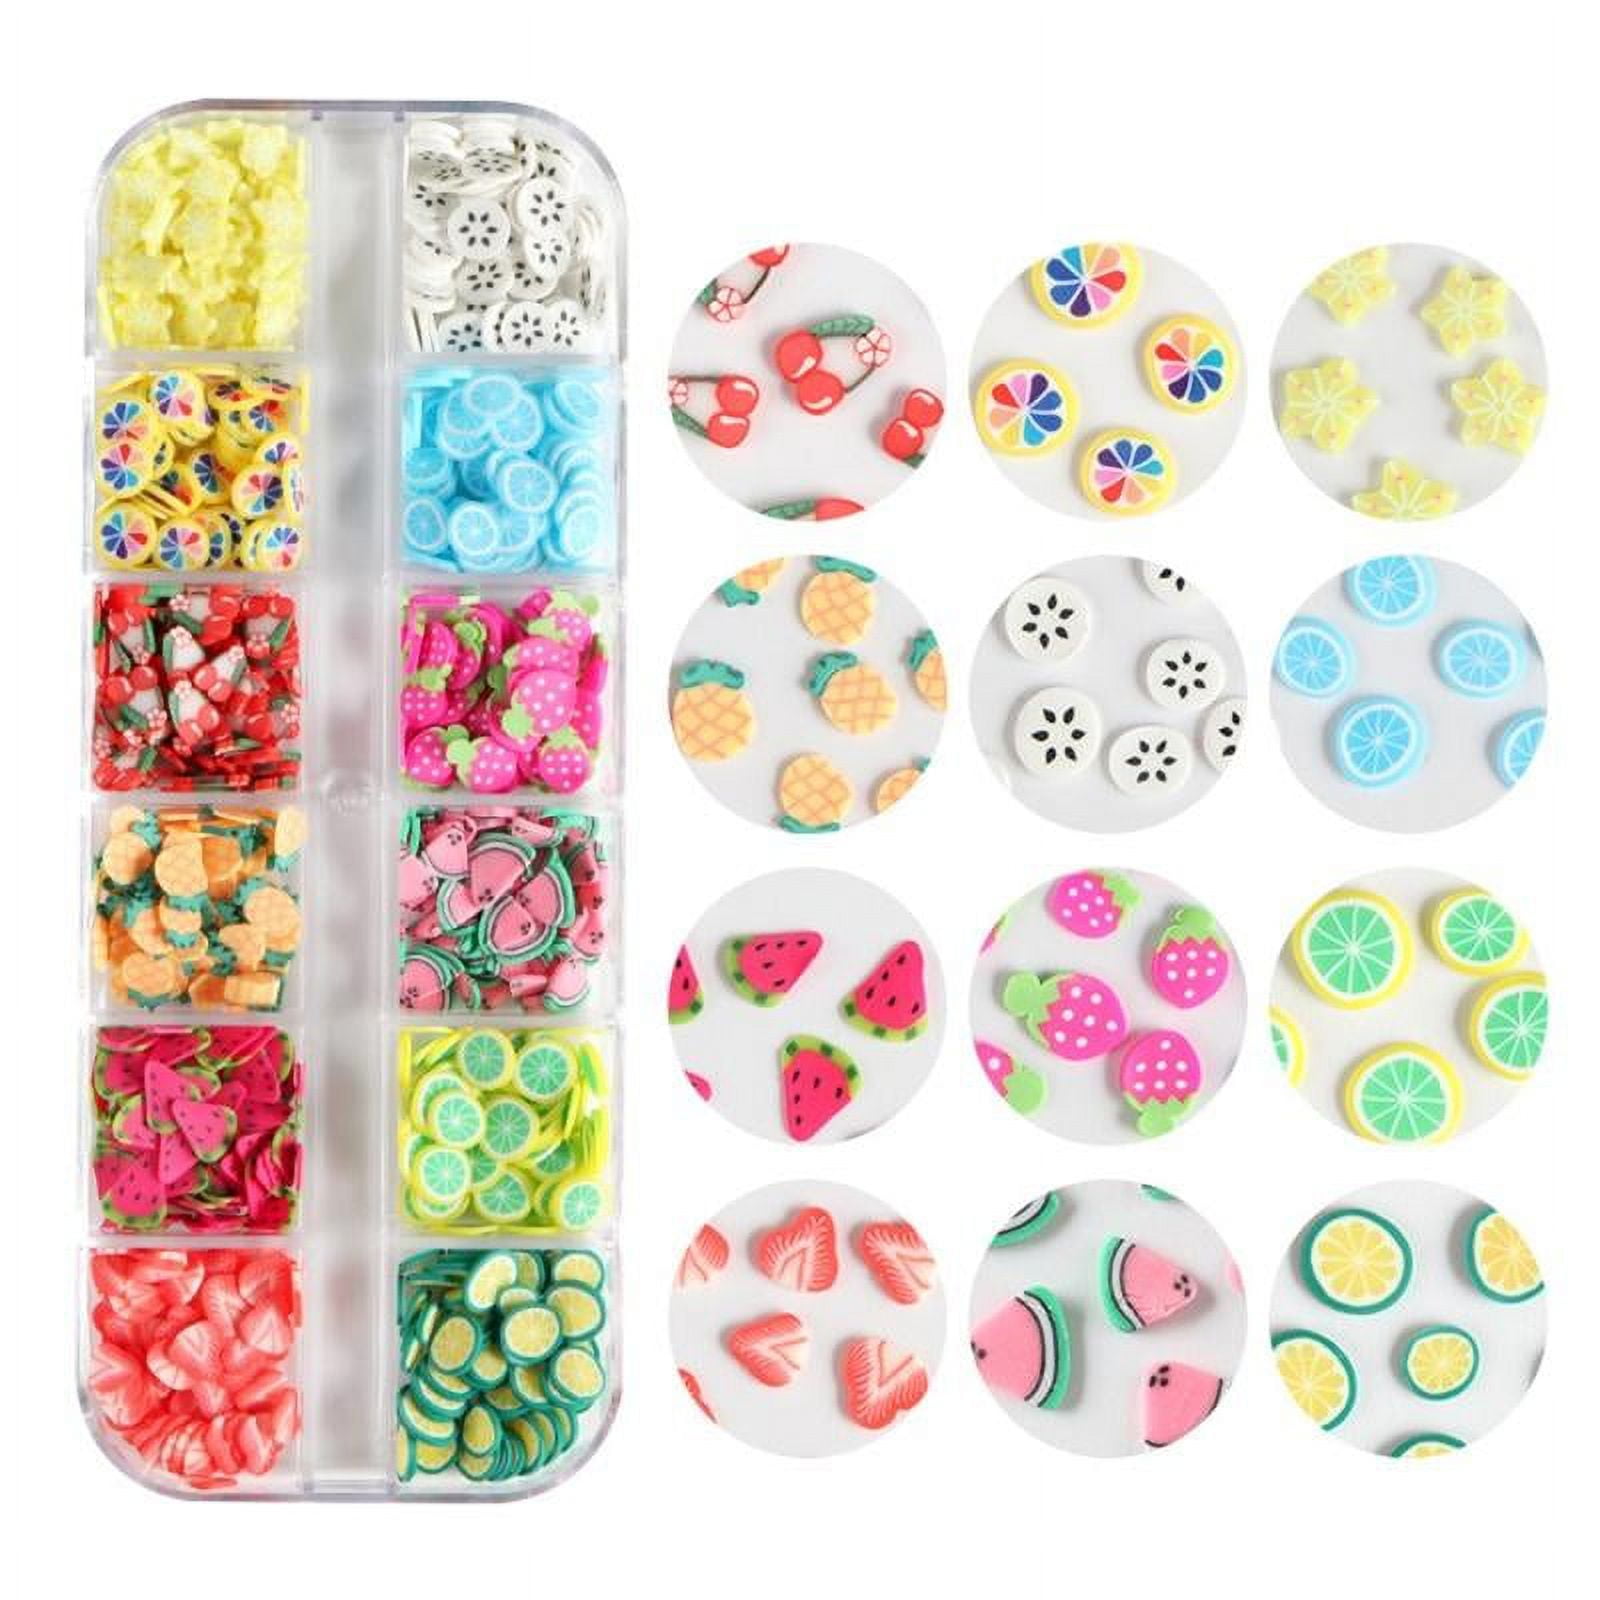 10g Valentines Mixed Polymer Clay Slices Resin Shaker Mold Filler